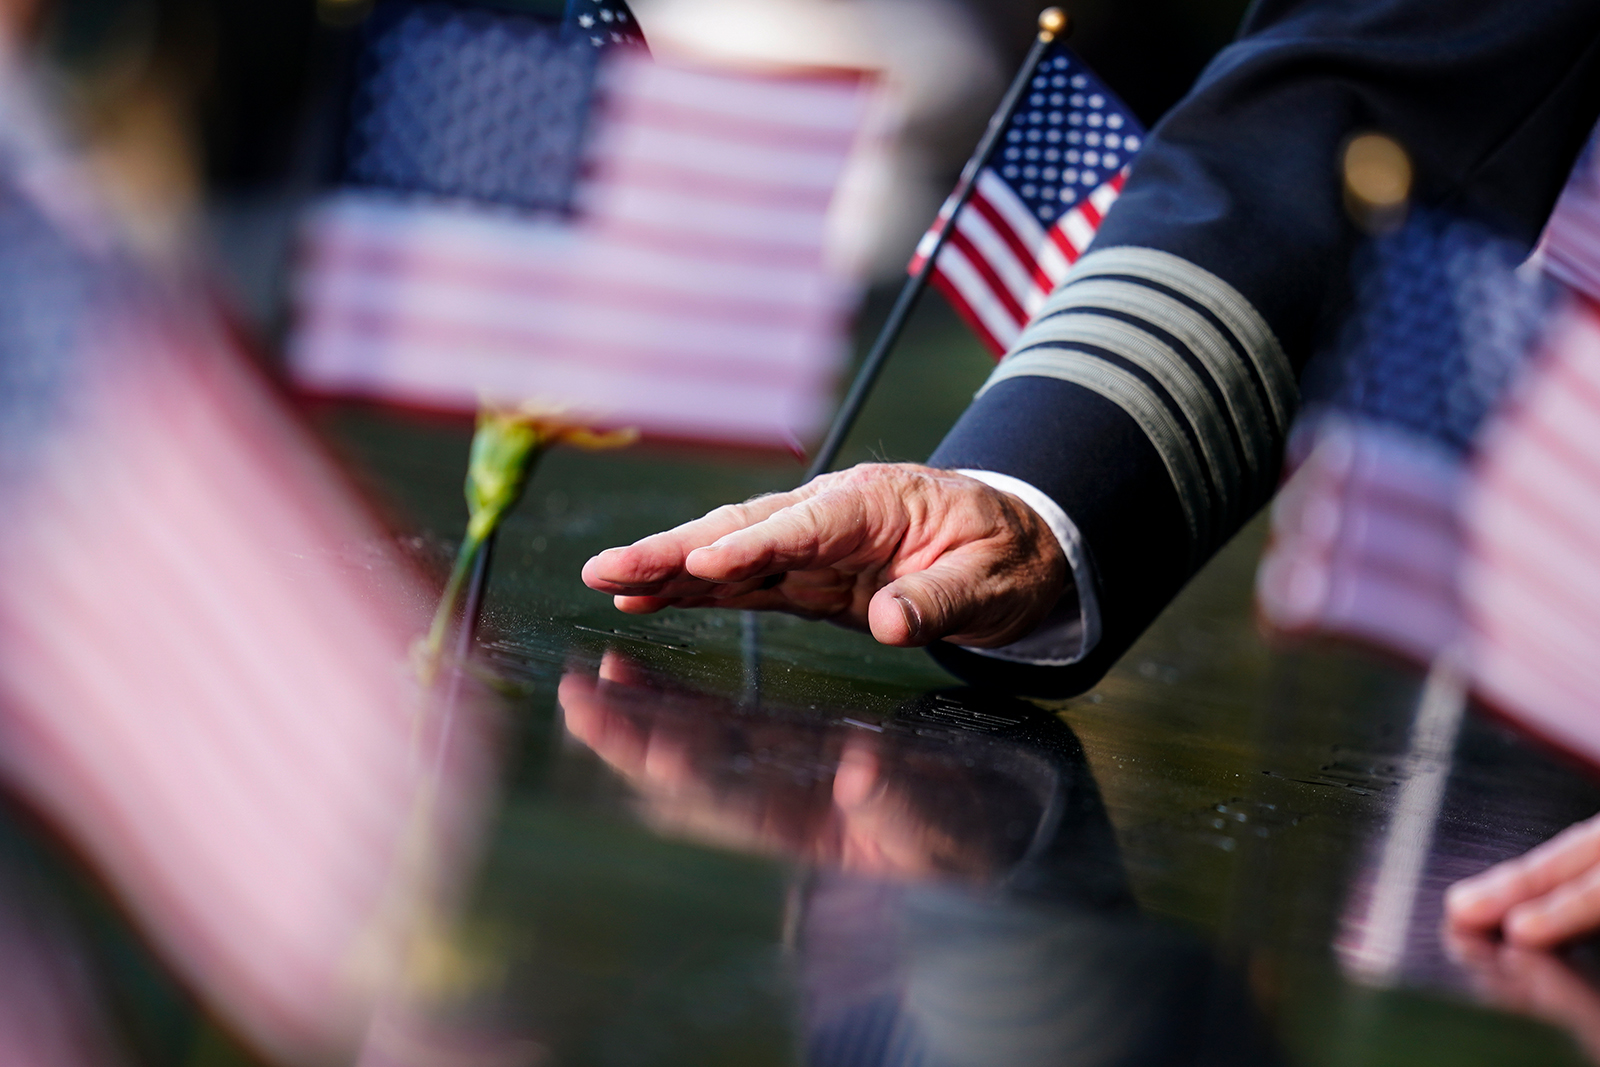 A person touches an inscribed name at the National September 11 Memorial and Museum ahead of the 20th anniversary of the 9/11 terrorist attacks, Friday, Sept. 10, 2021, in New York. (AP Photo/Matt Rourke)